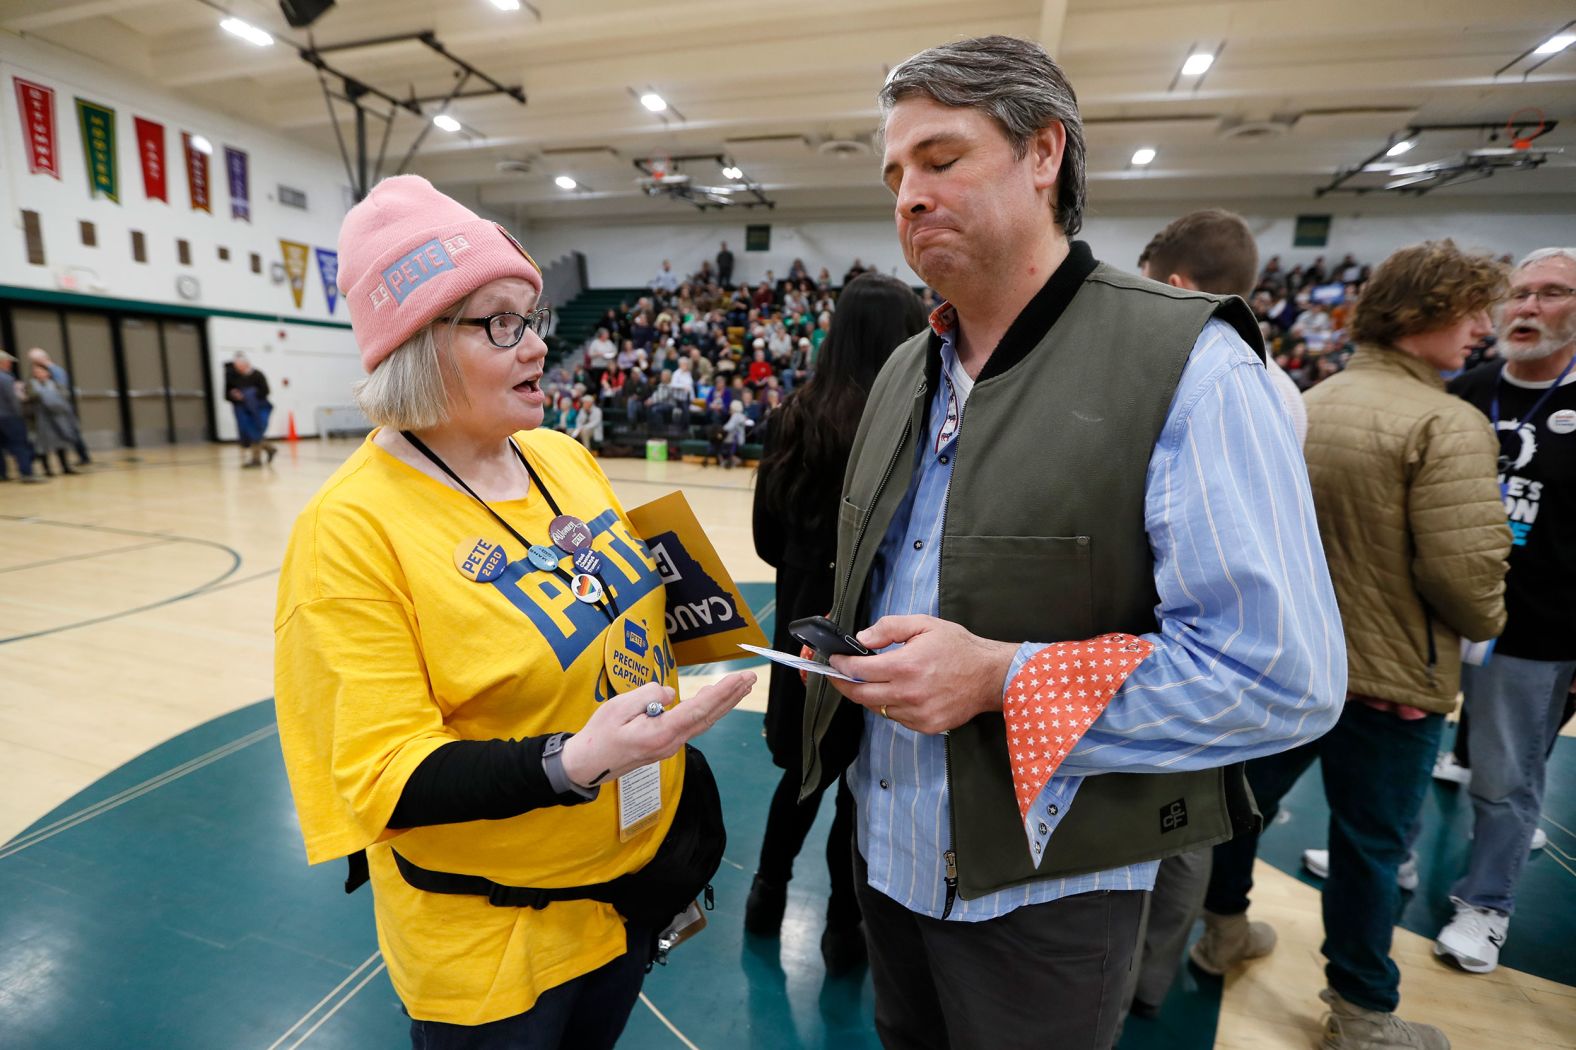 Elizabeth Hendrix, a precinct captain for Buttigieg, tries to persuade Tim Gannon to join her group at a caucus in Des Moines.